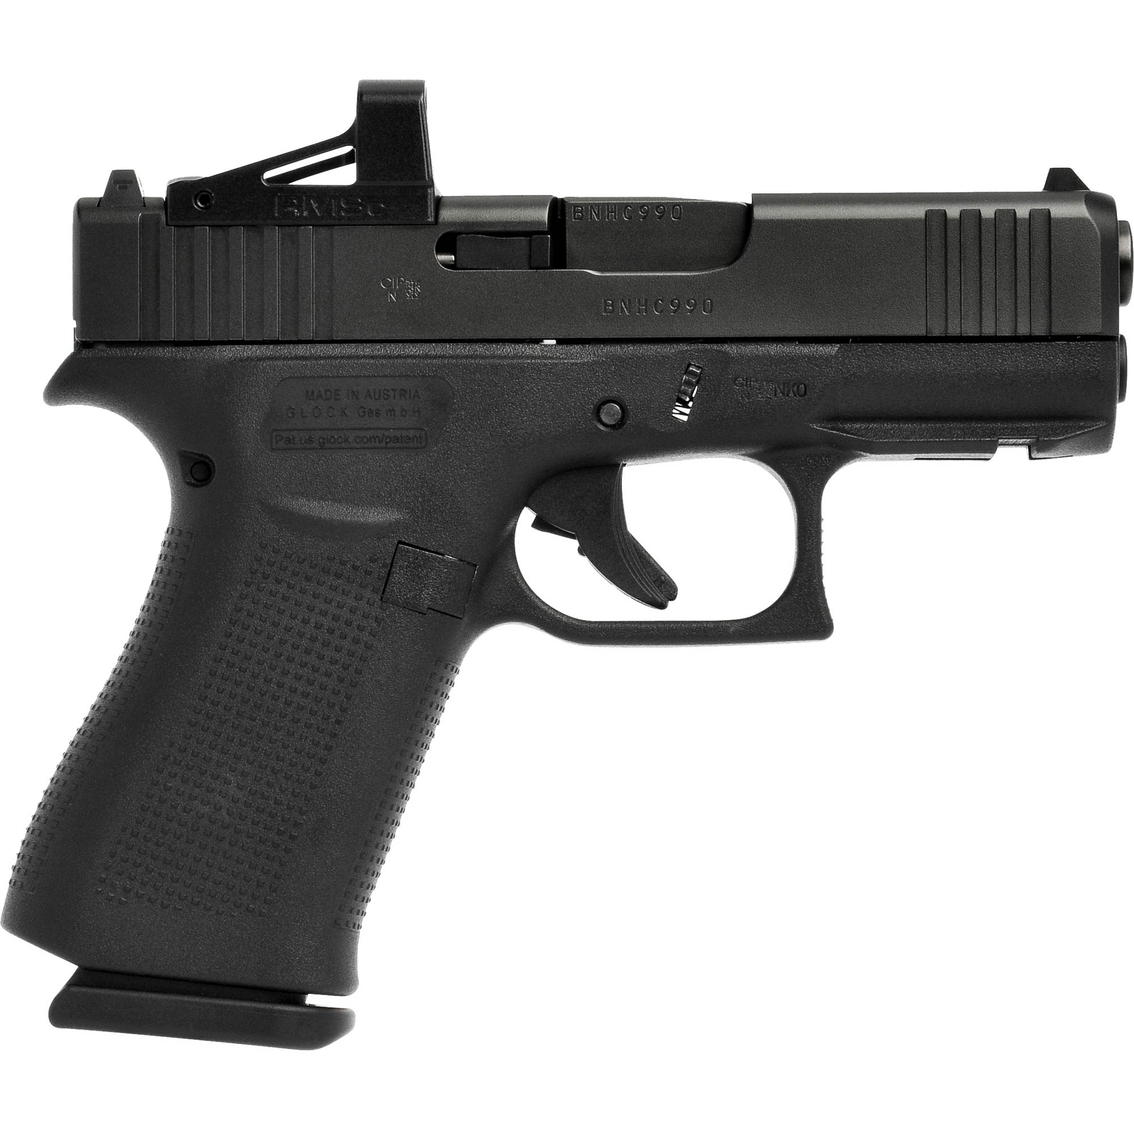 Glock 43X MOS 9mm 3.41 in. Barrel with Red Dot Sight 10 Rnd Pistol Black - Image 2 of 3